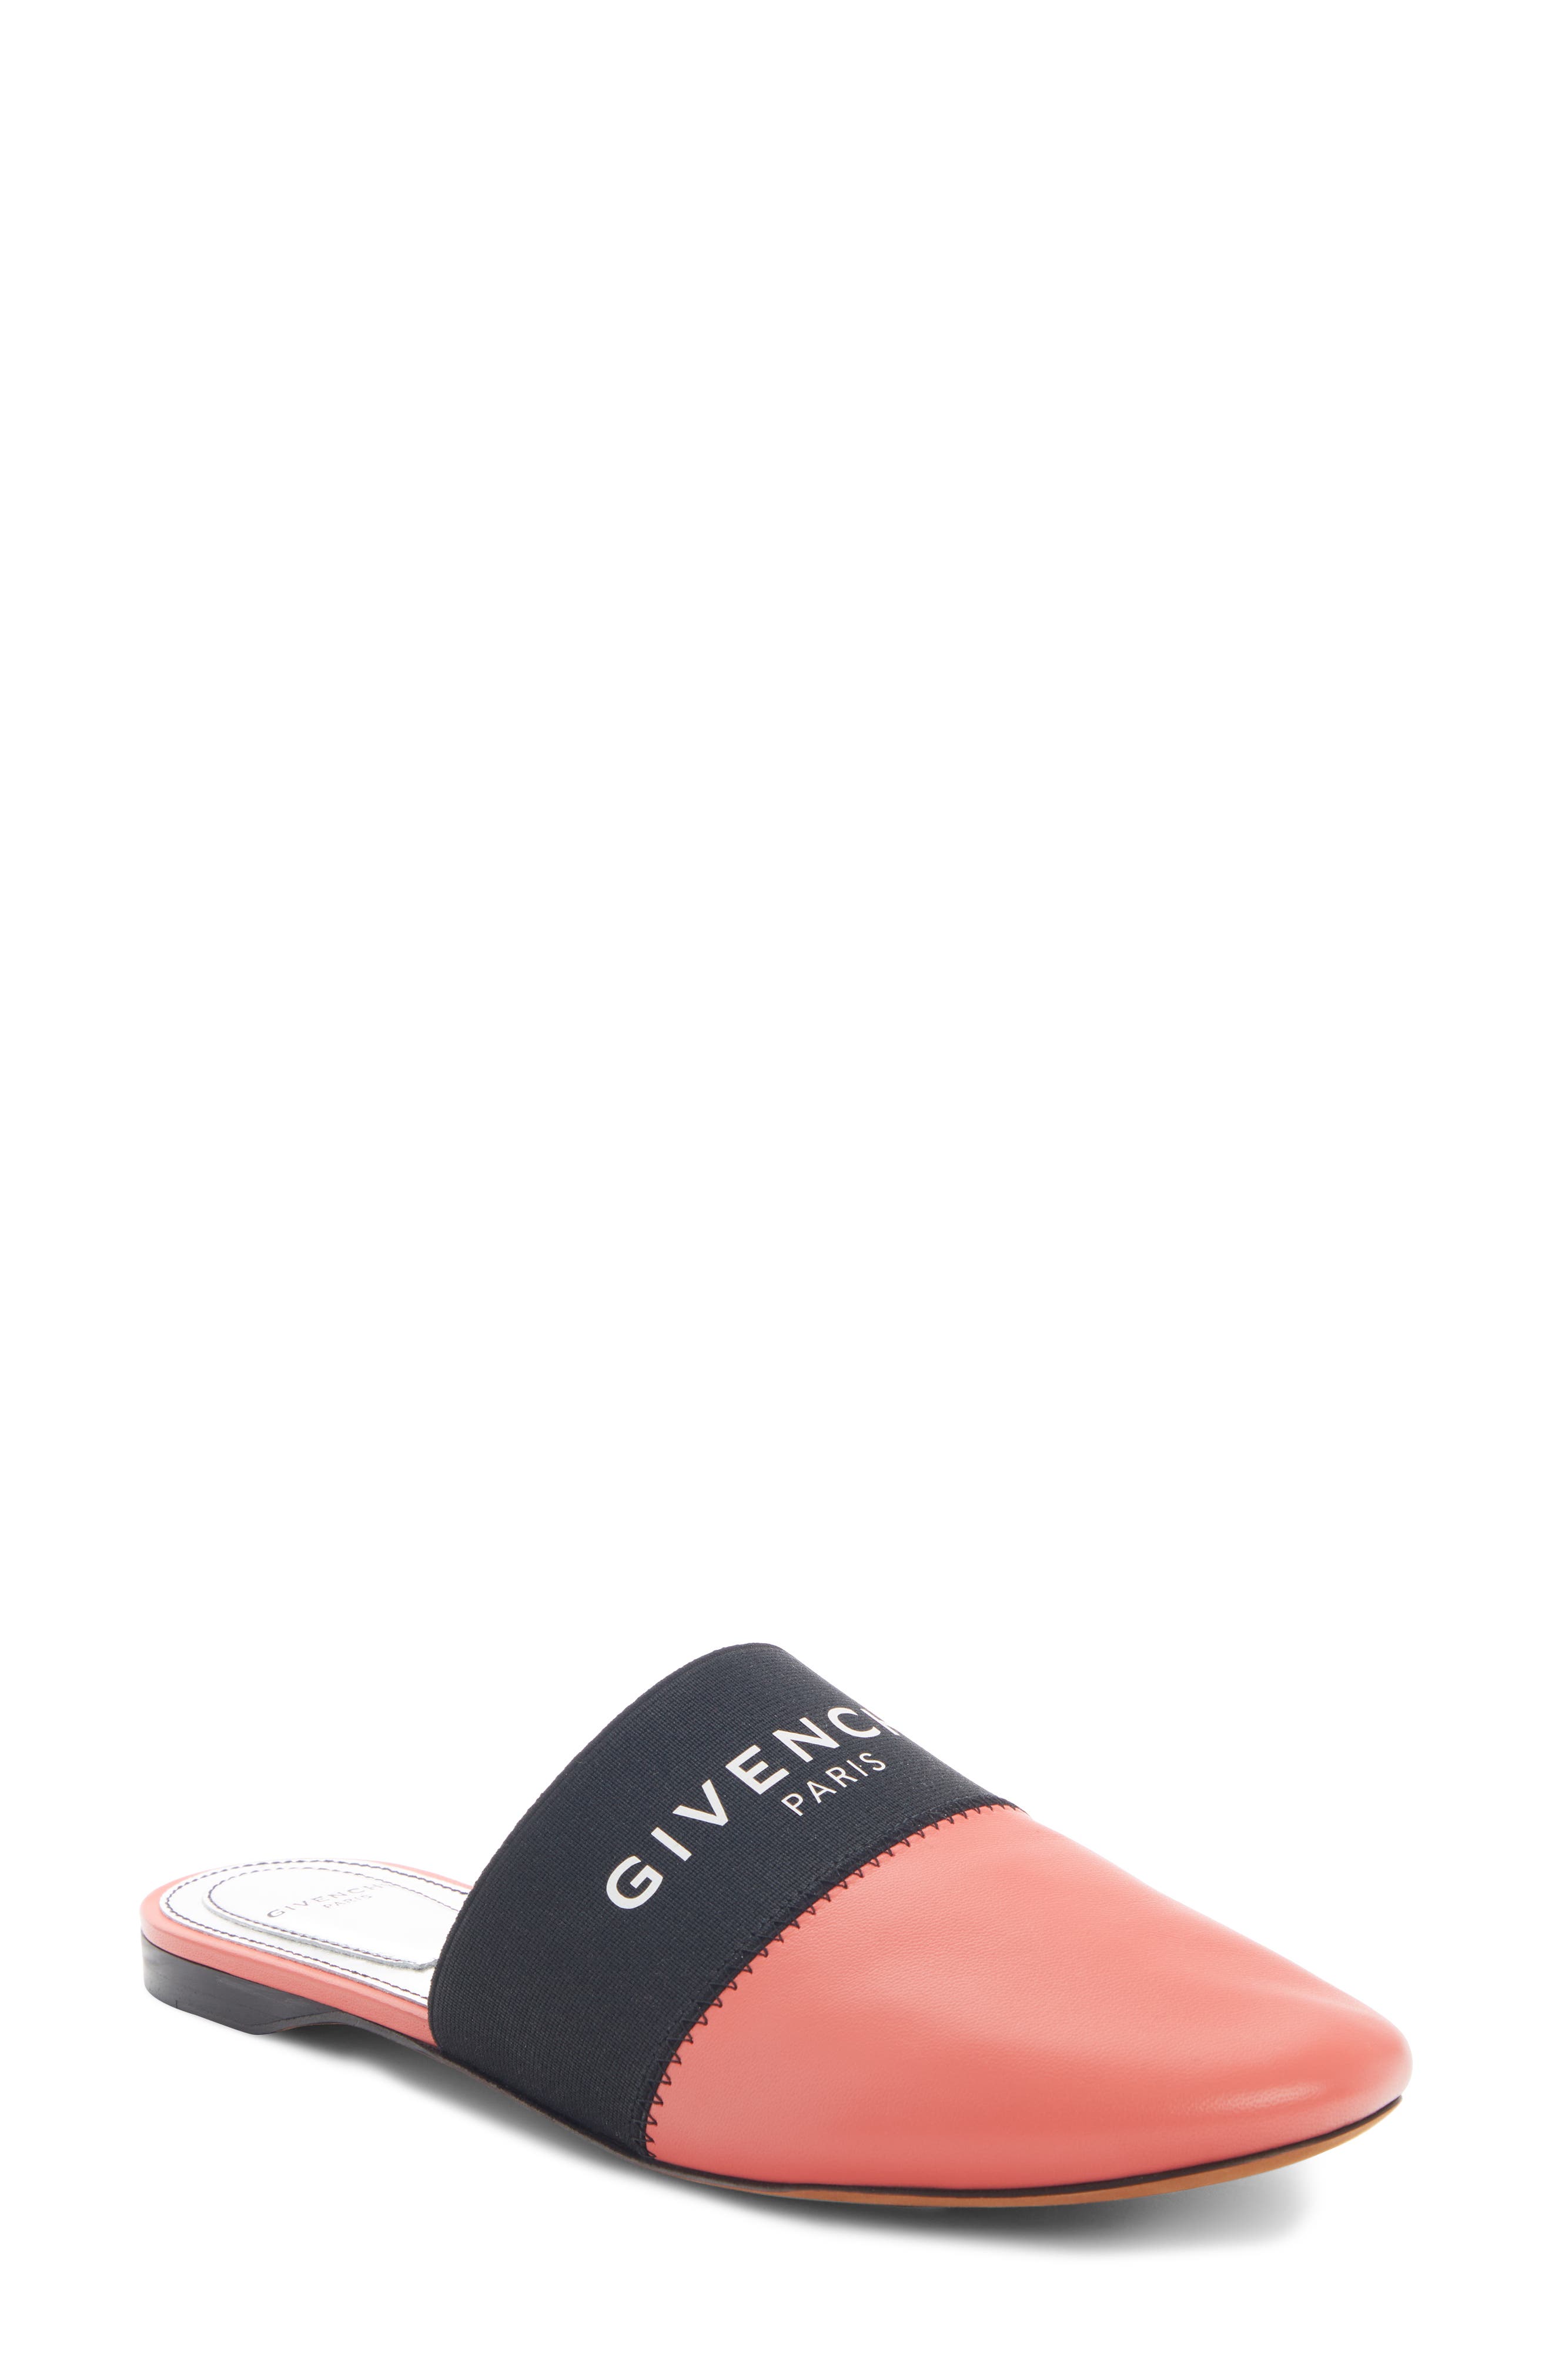 givenchy bedford mules sale